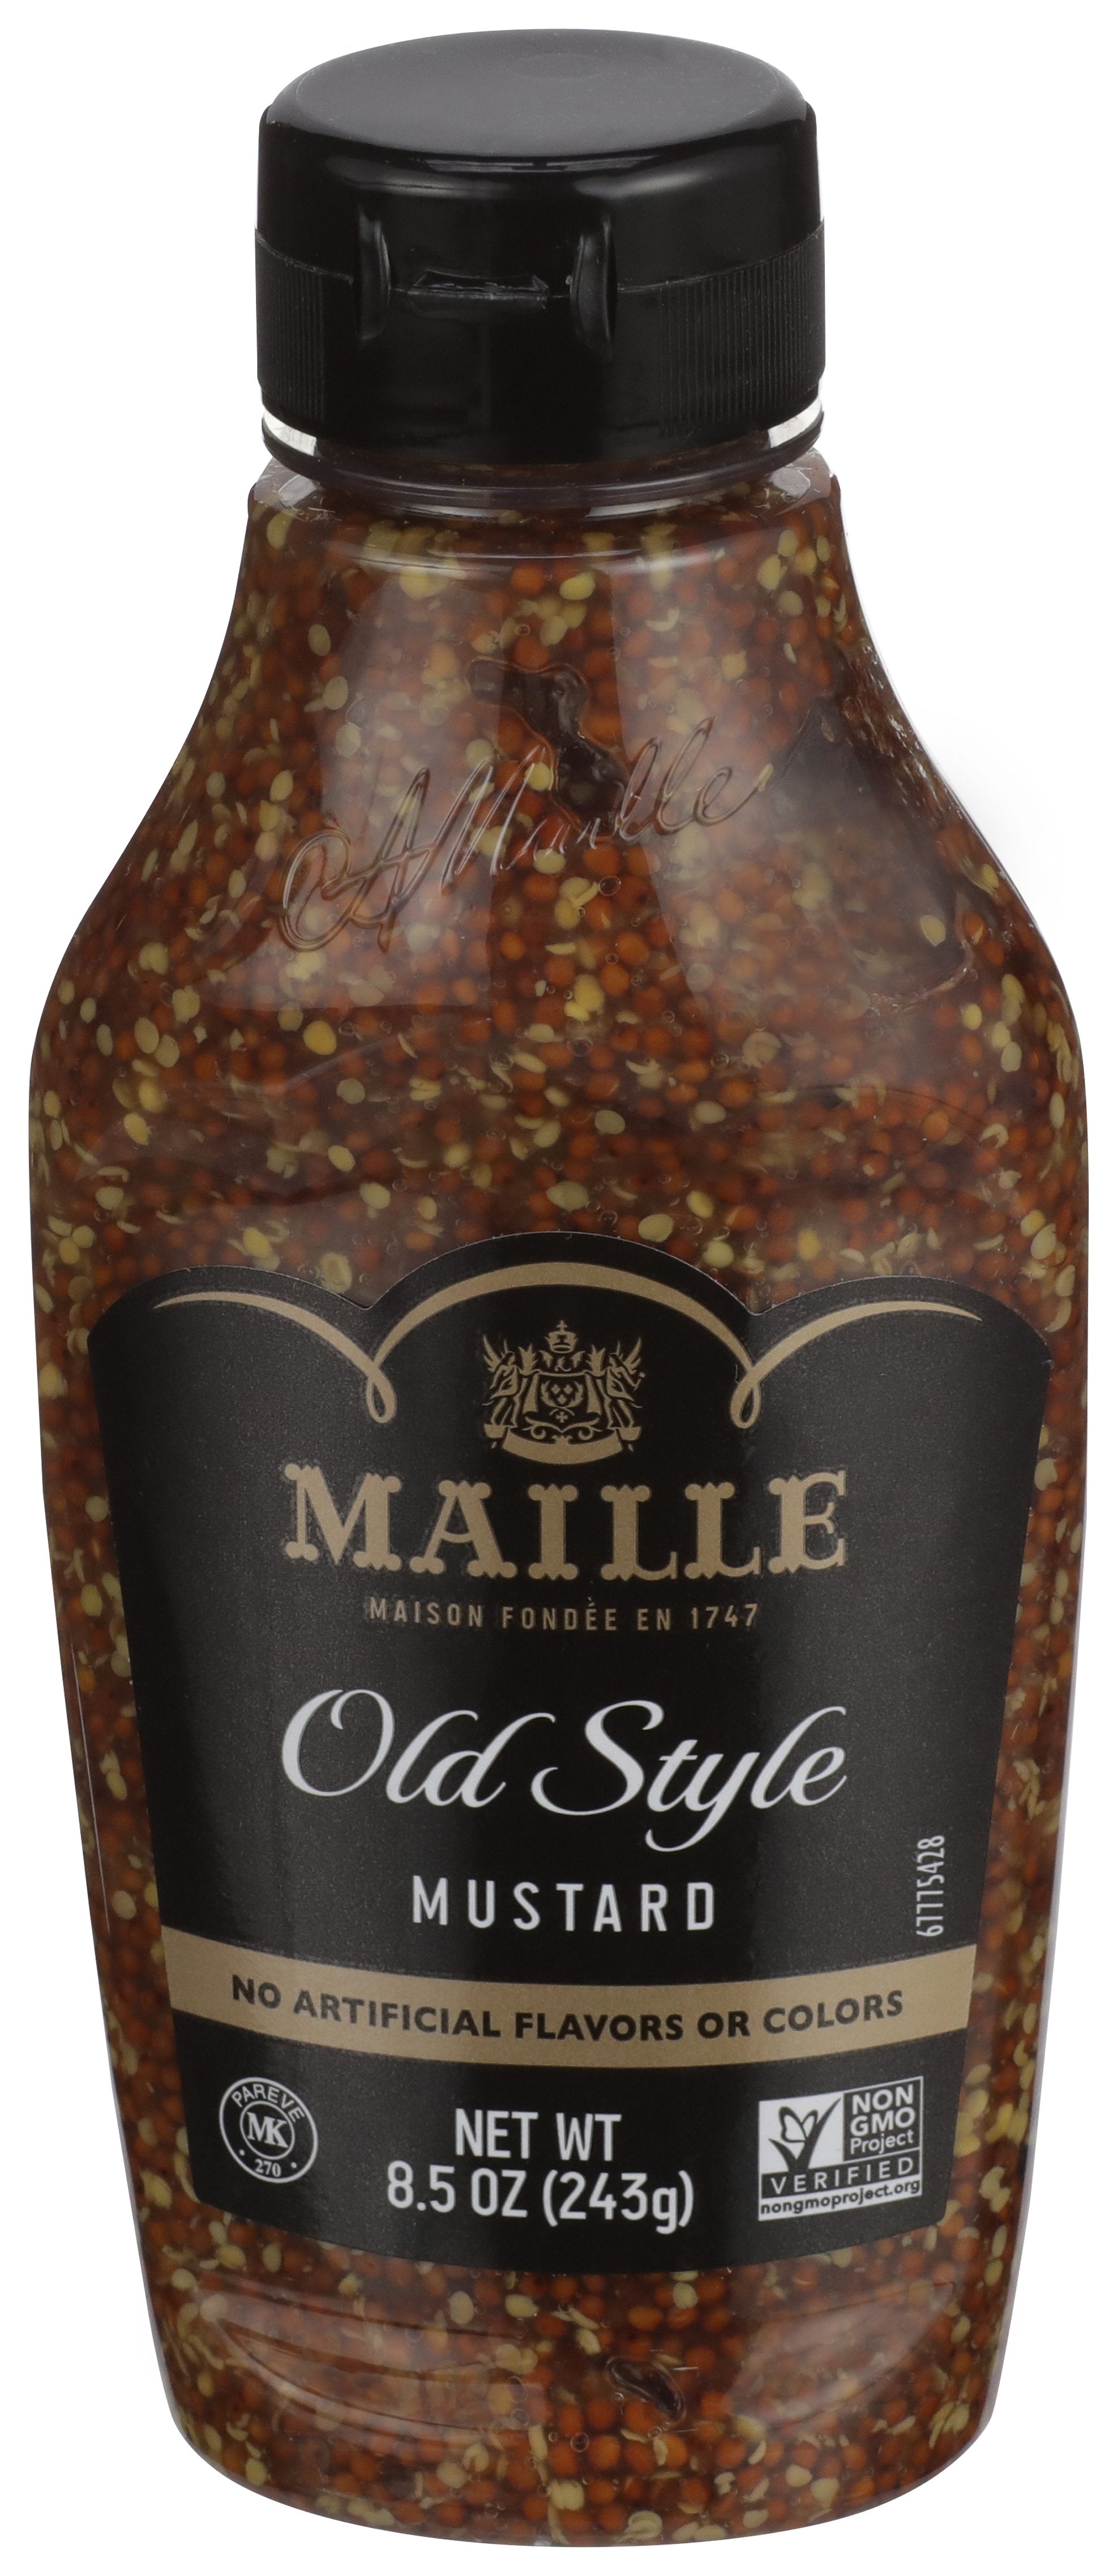 MAILLE MUSTARD OLD SYTLE SQZ - Case of 6